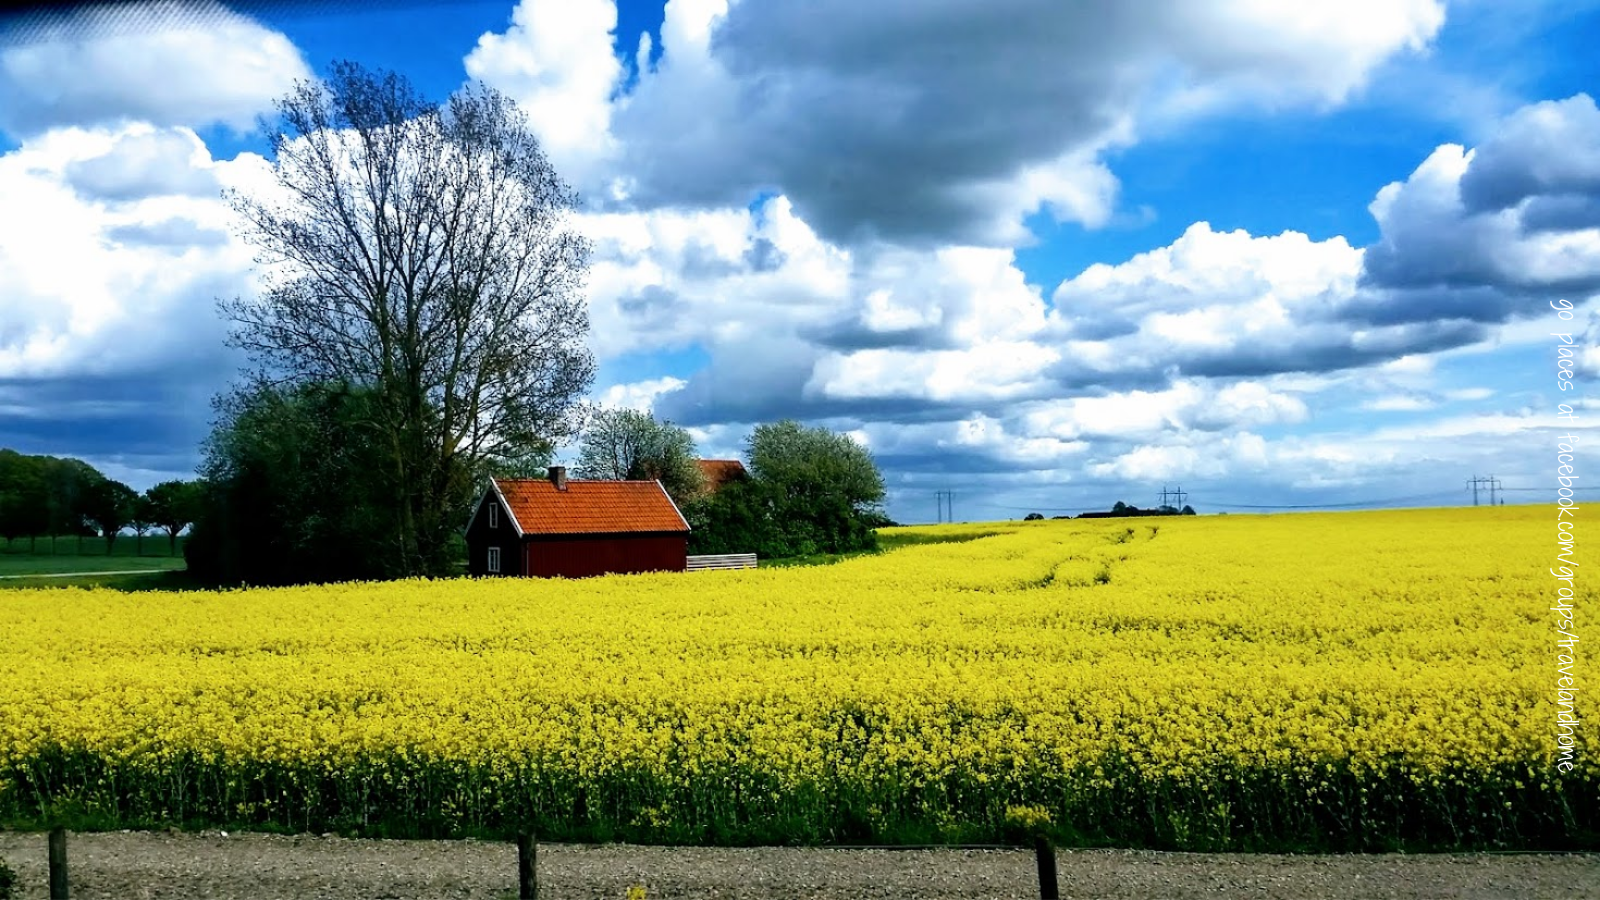 Canola fields along a railway line on the way to Karlshamn in Sweden follow the flowers